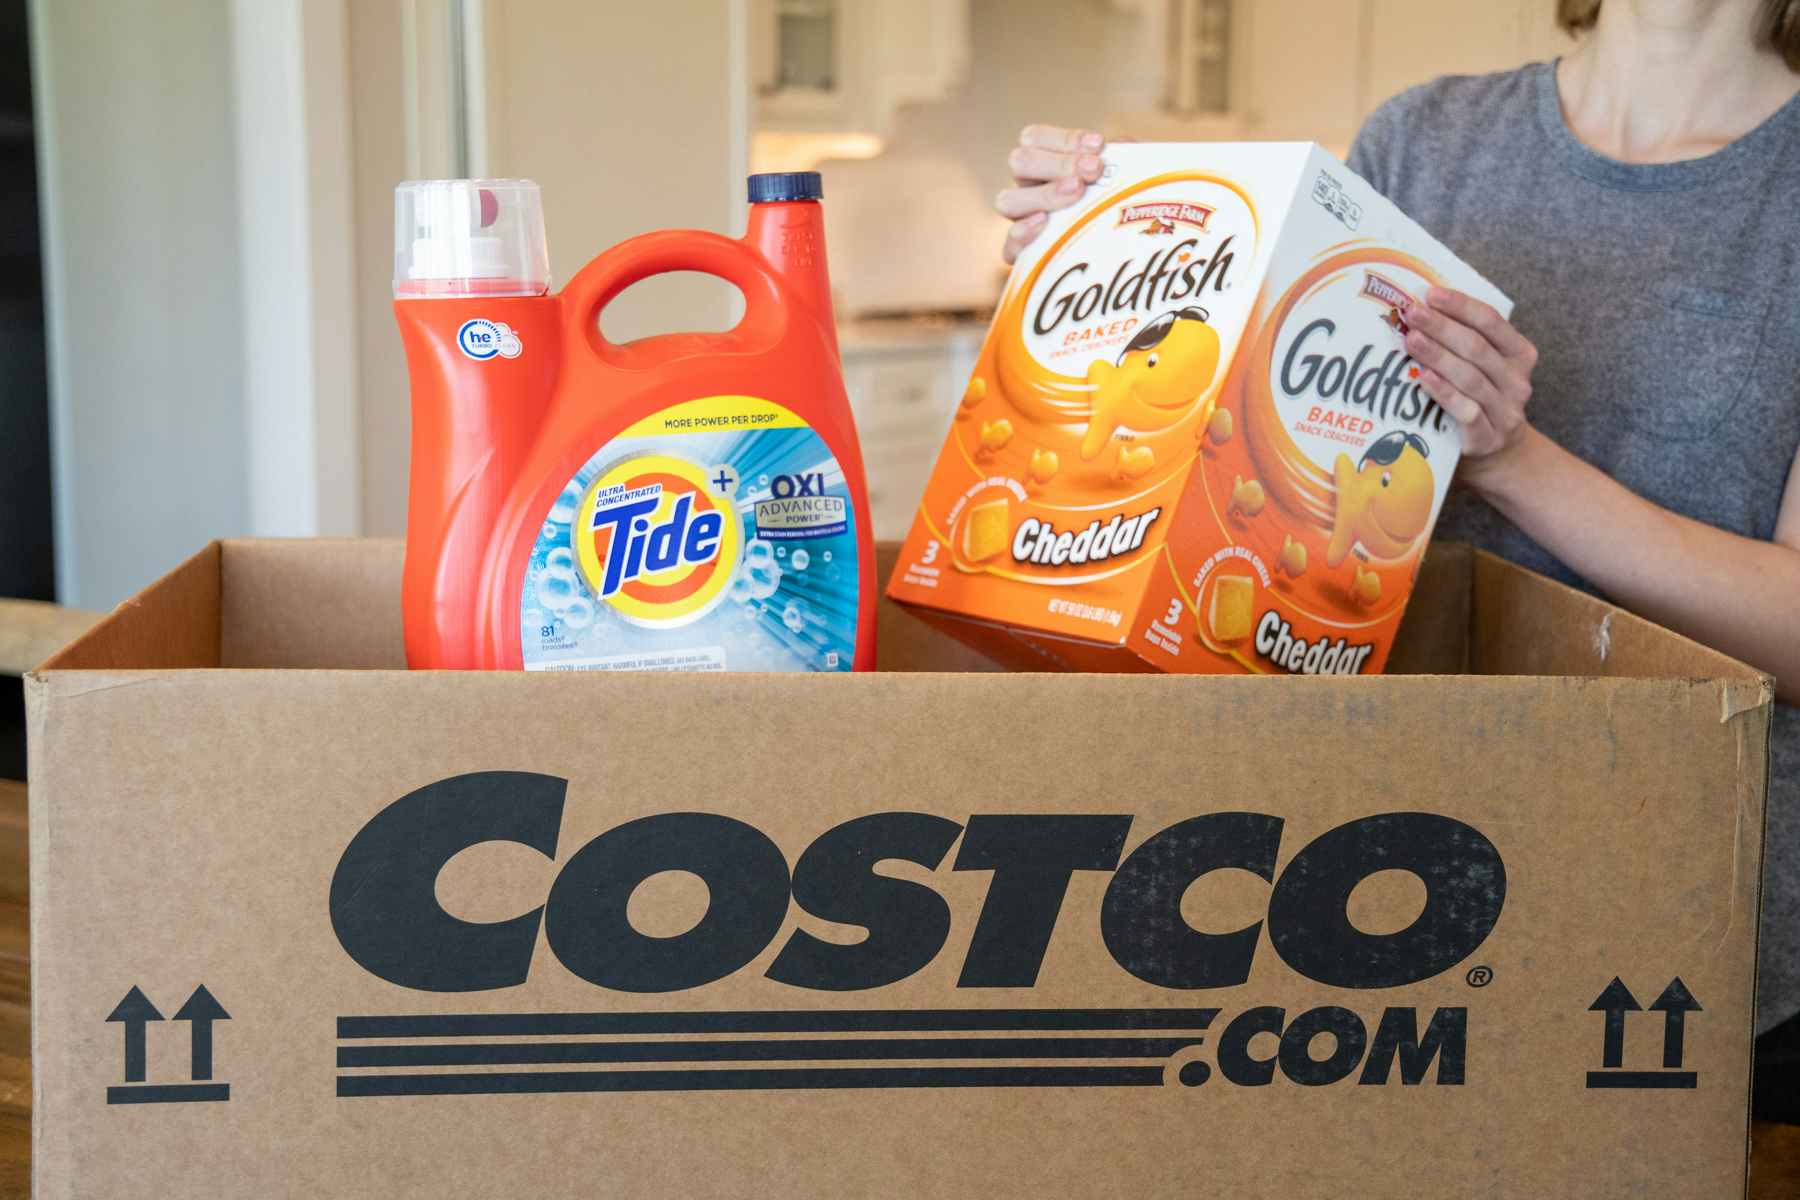 A woman pulling gold fish crackers and tide from a Costco.com shipping box.